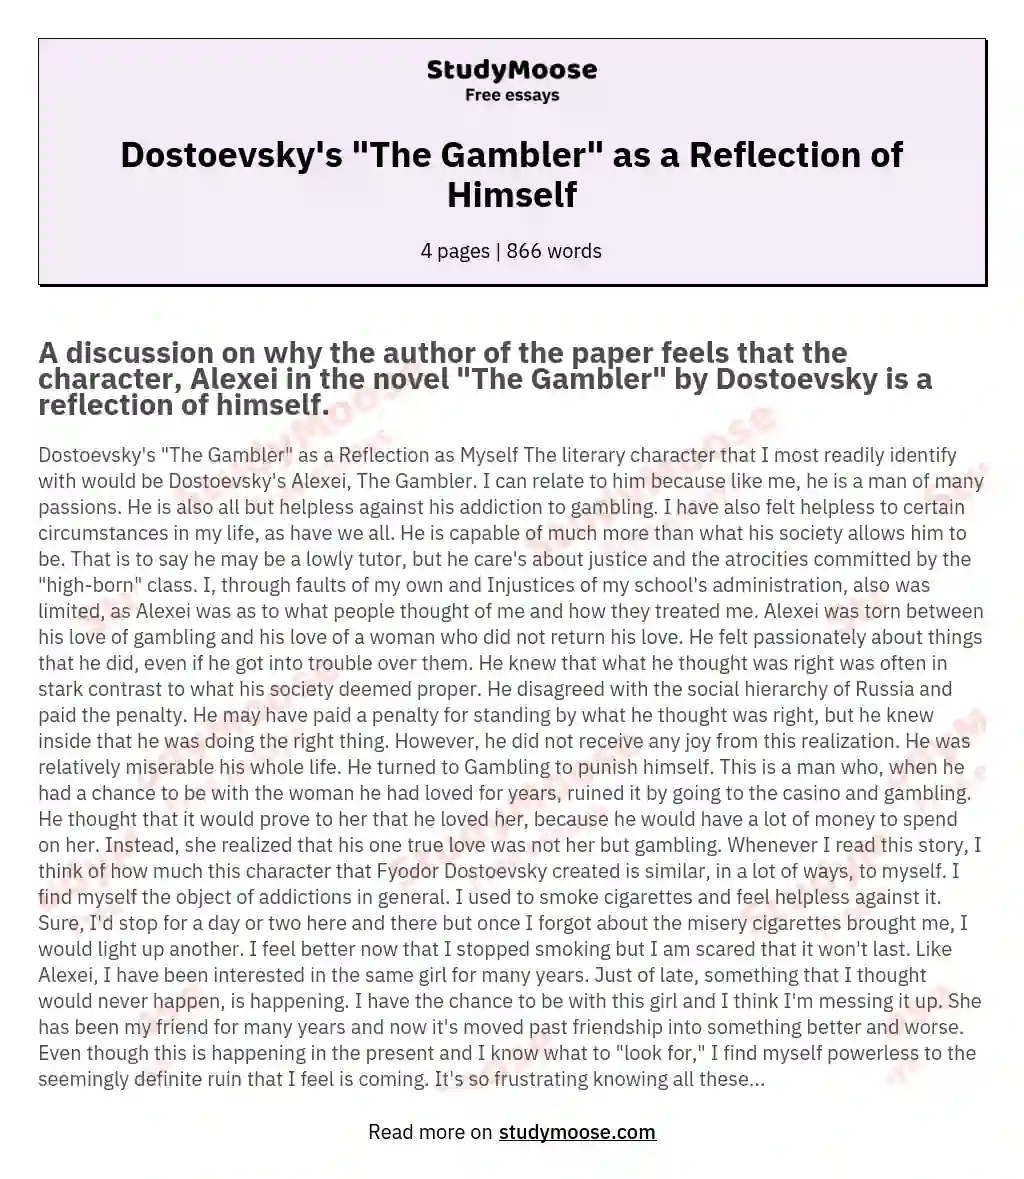 Dostoevsky's "The Gambler" as a Reflection of Himself essay